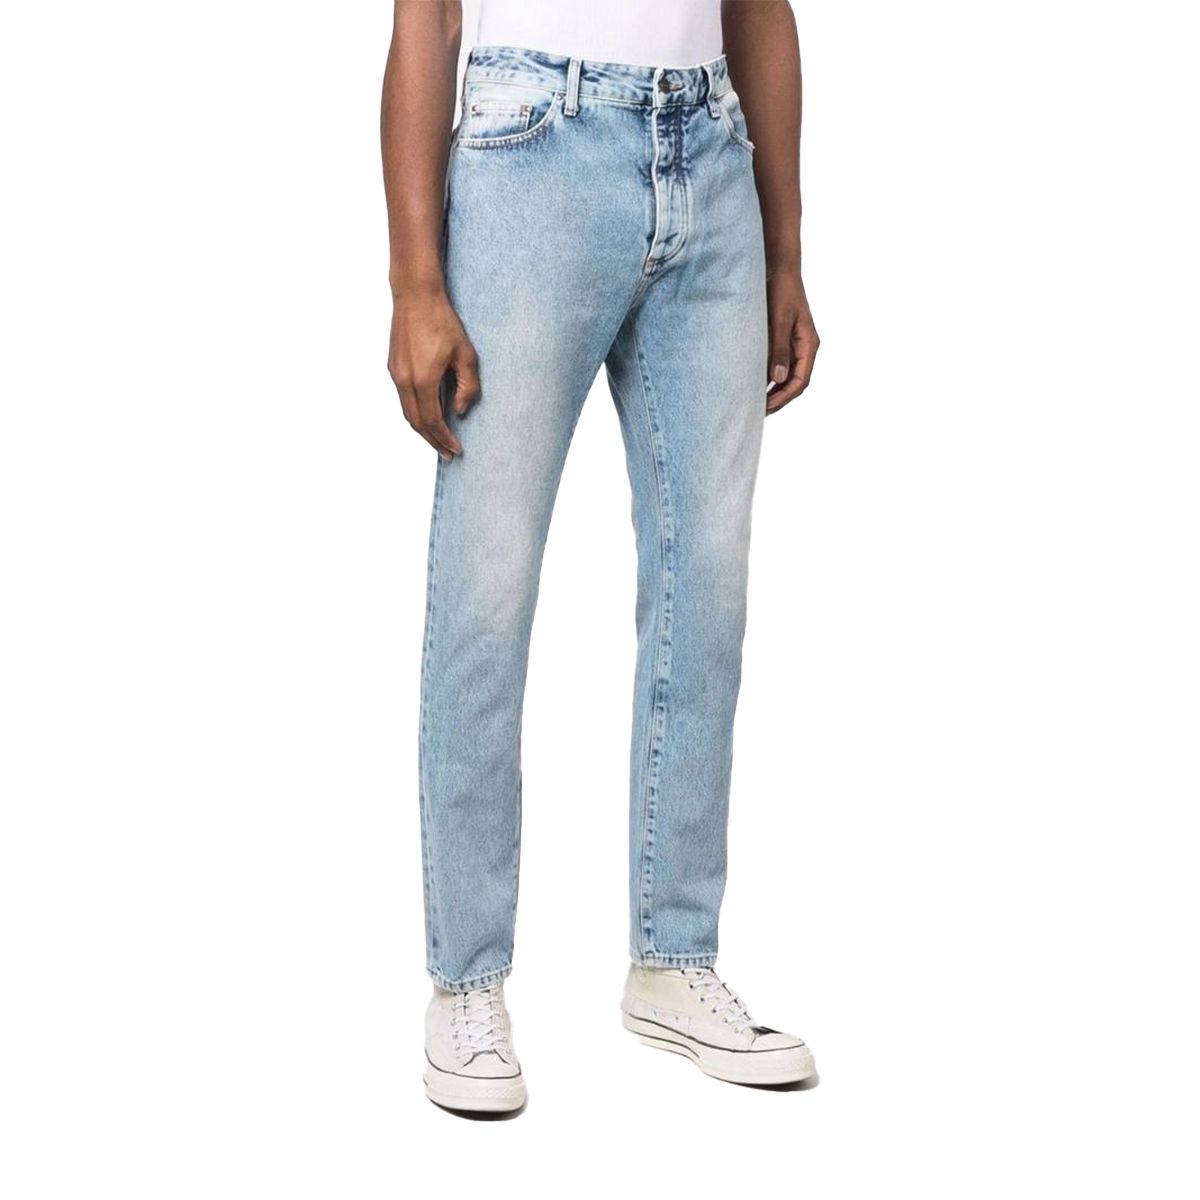 Faded Logo Print Jeans